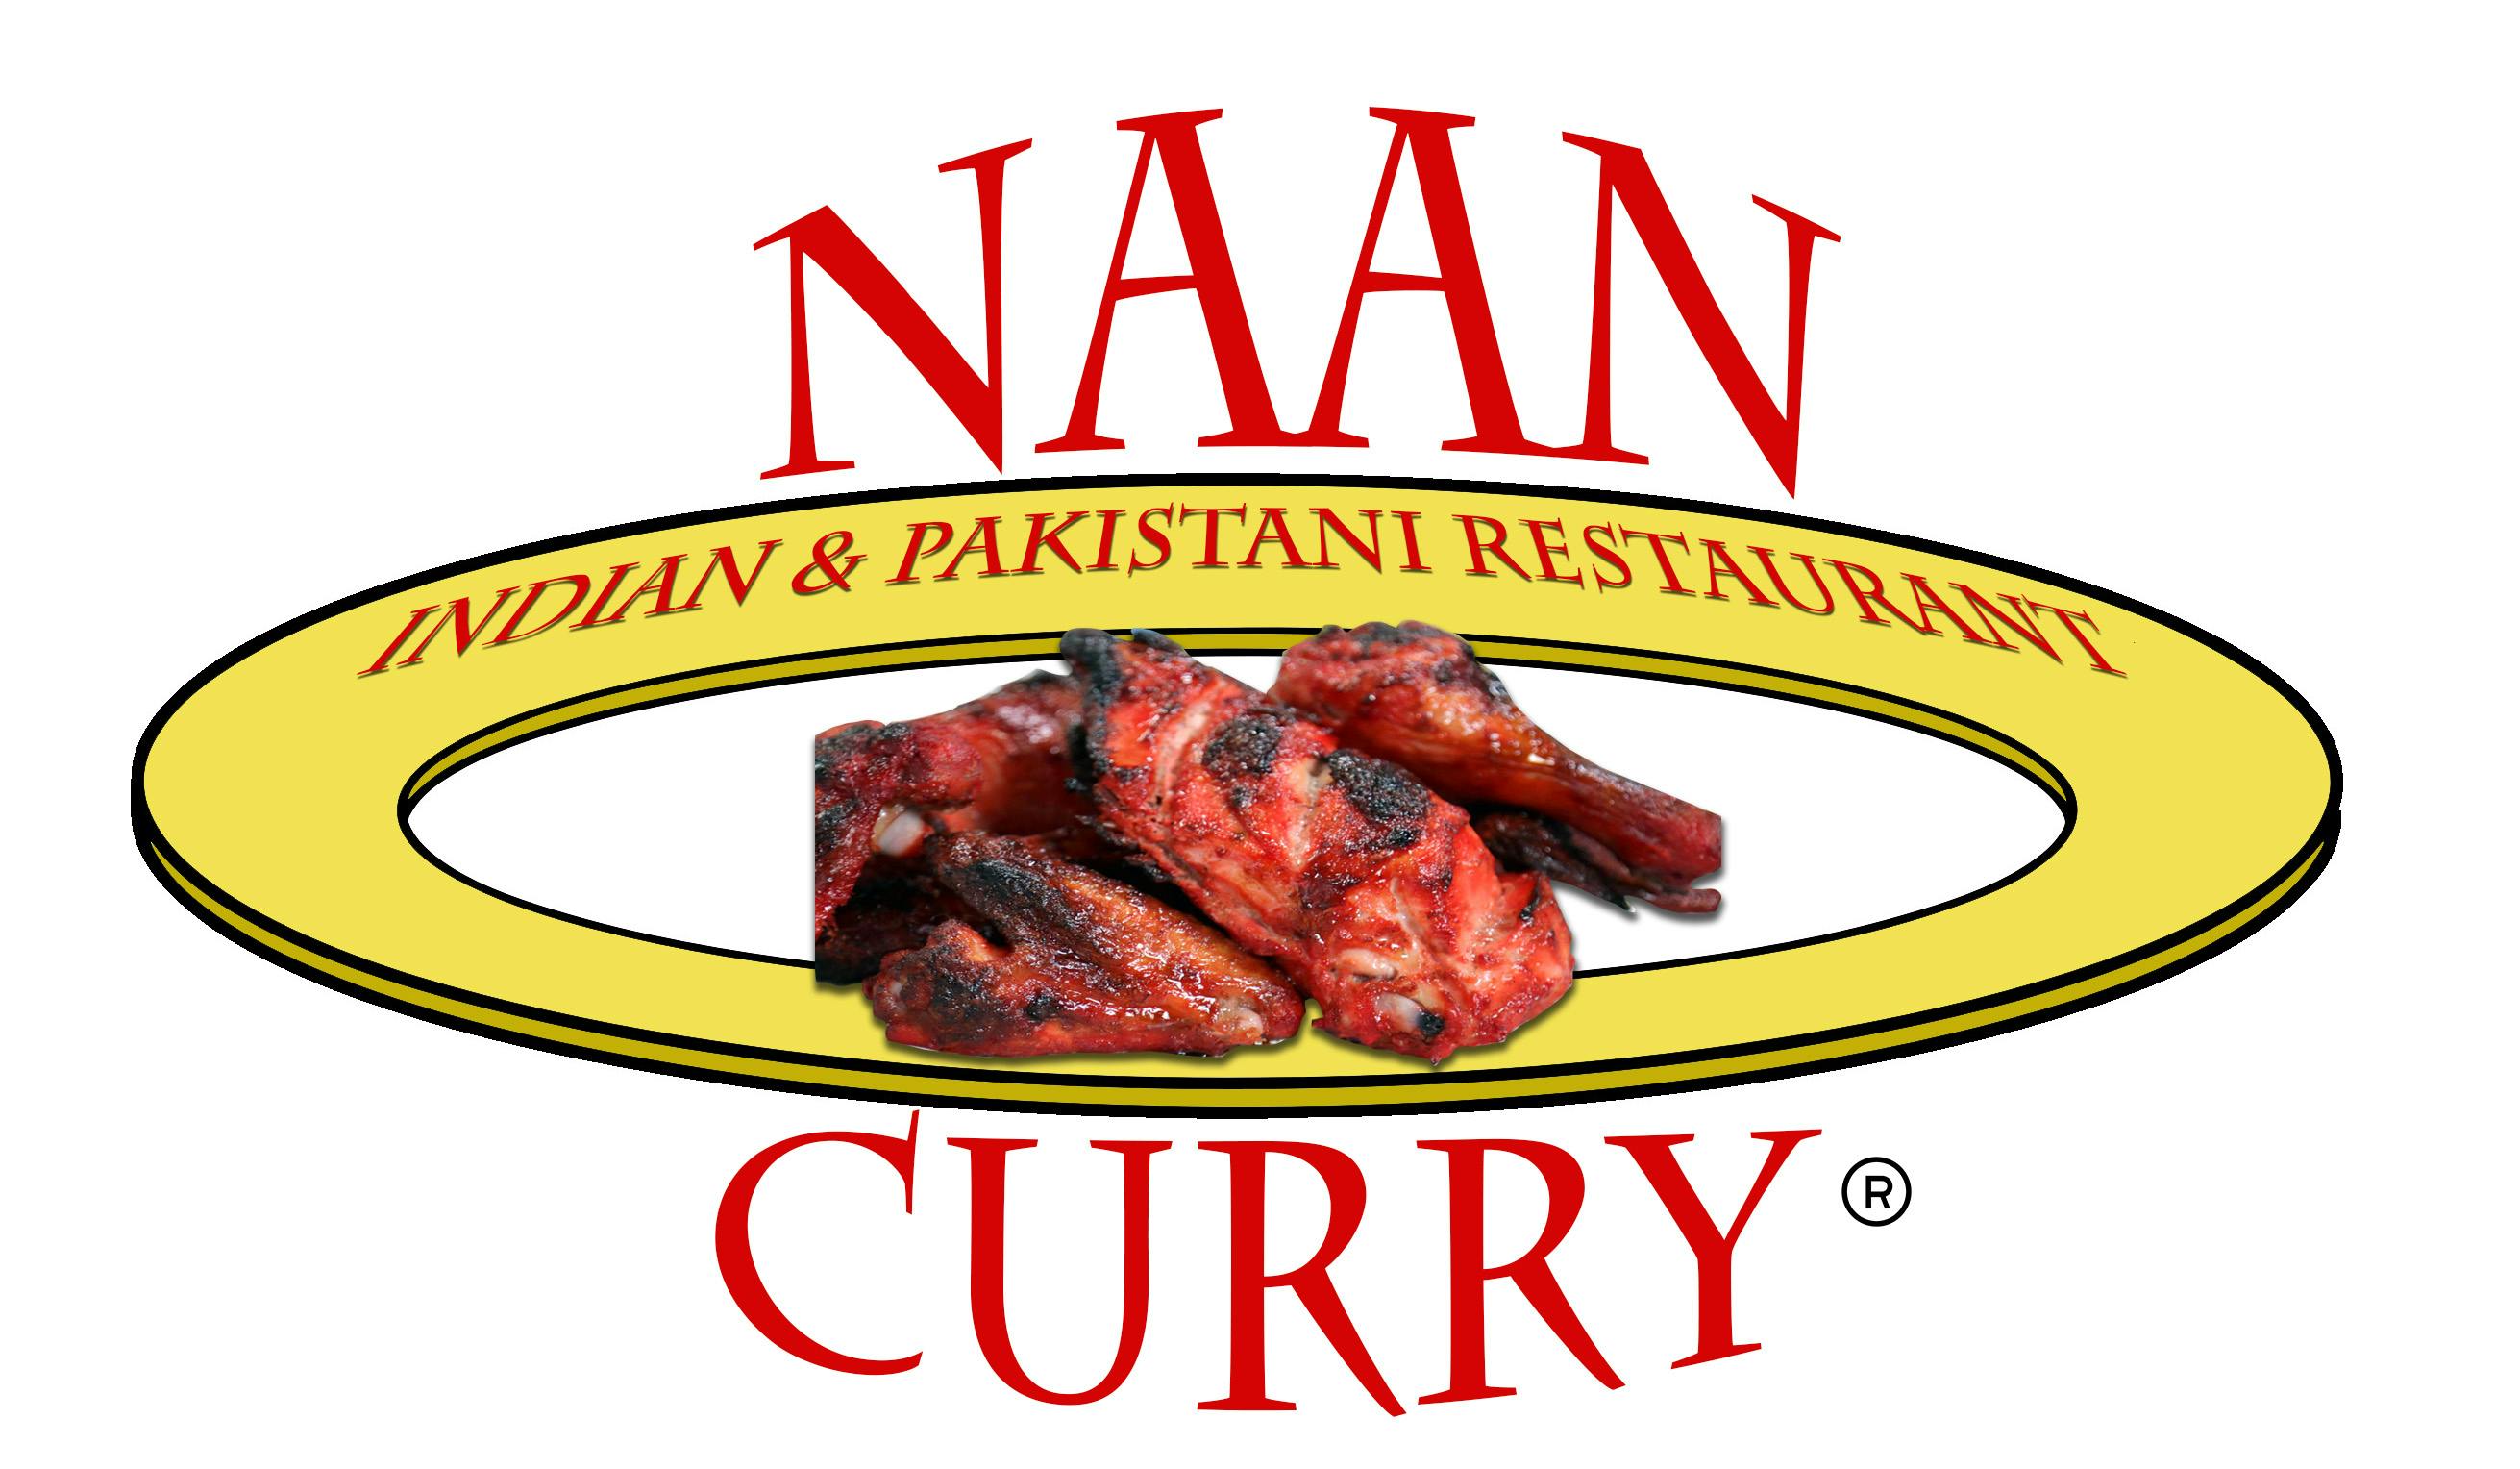 Naan Curry Indian and Pakistani Restaurant menu in San Francisco, CA 94549